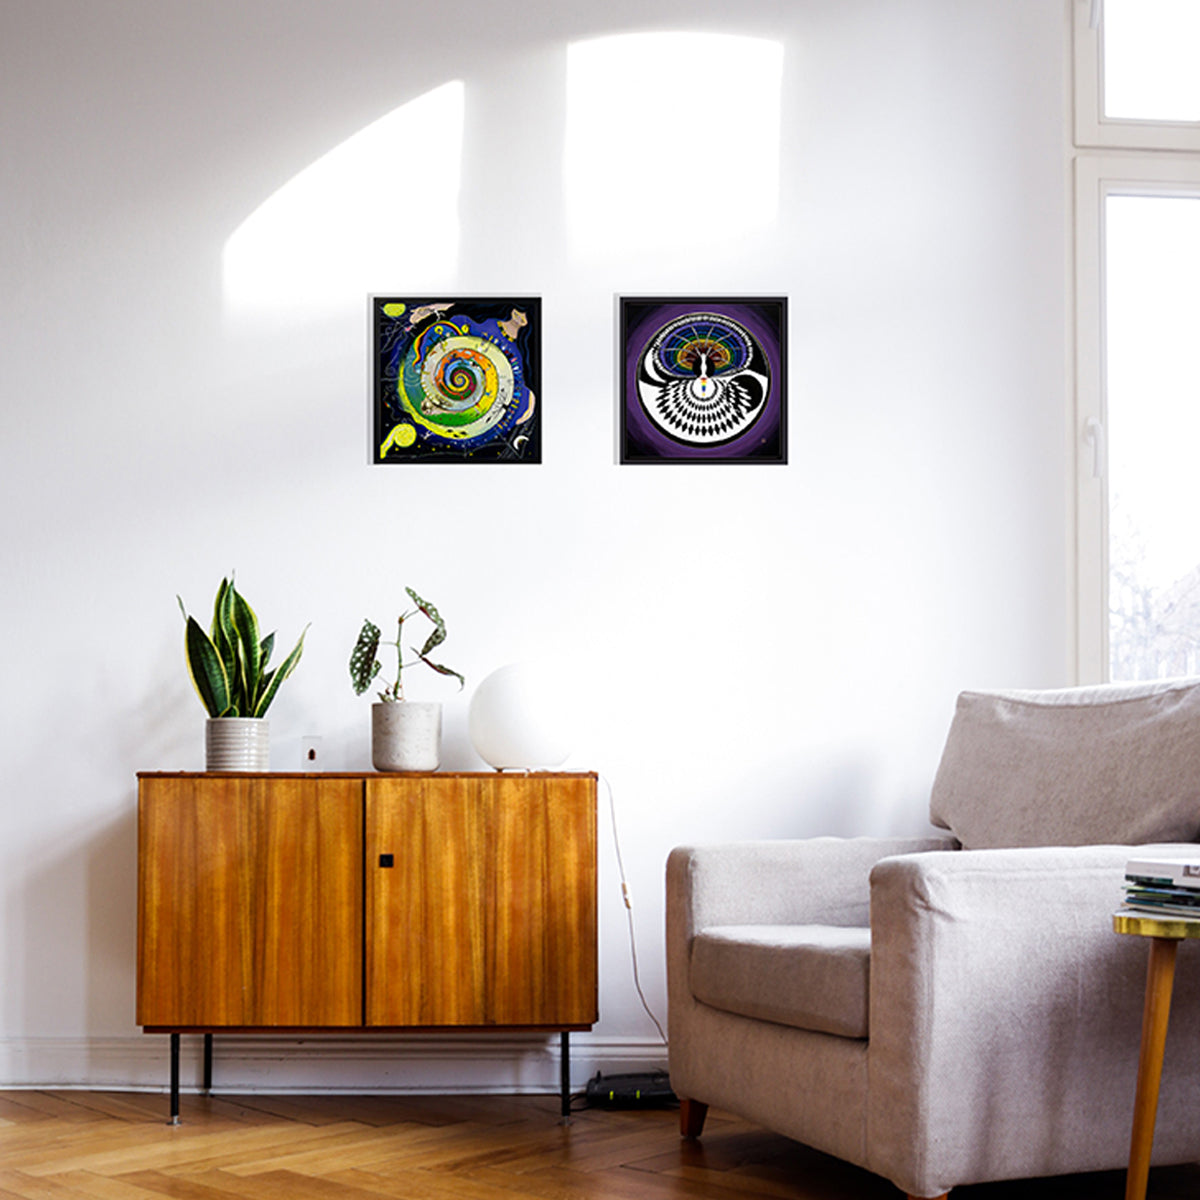 two framed prints of moon goddess images in a spiral and a circle